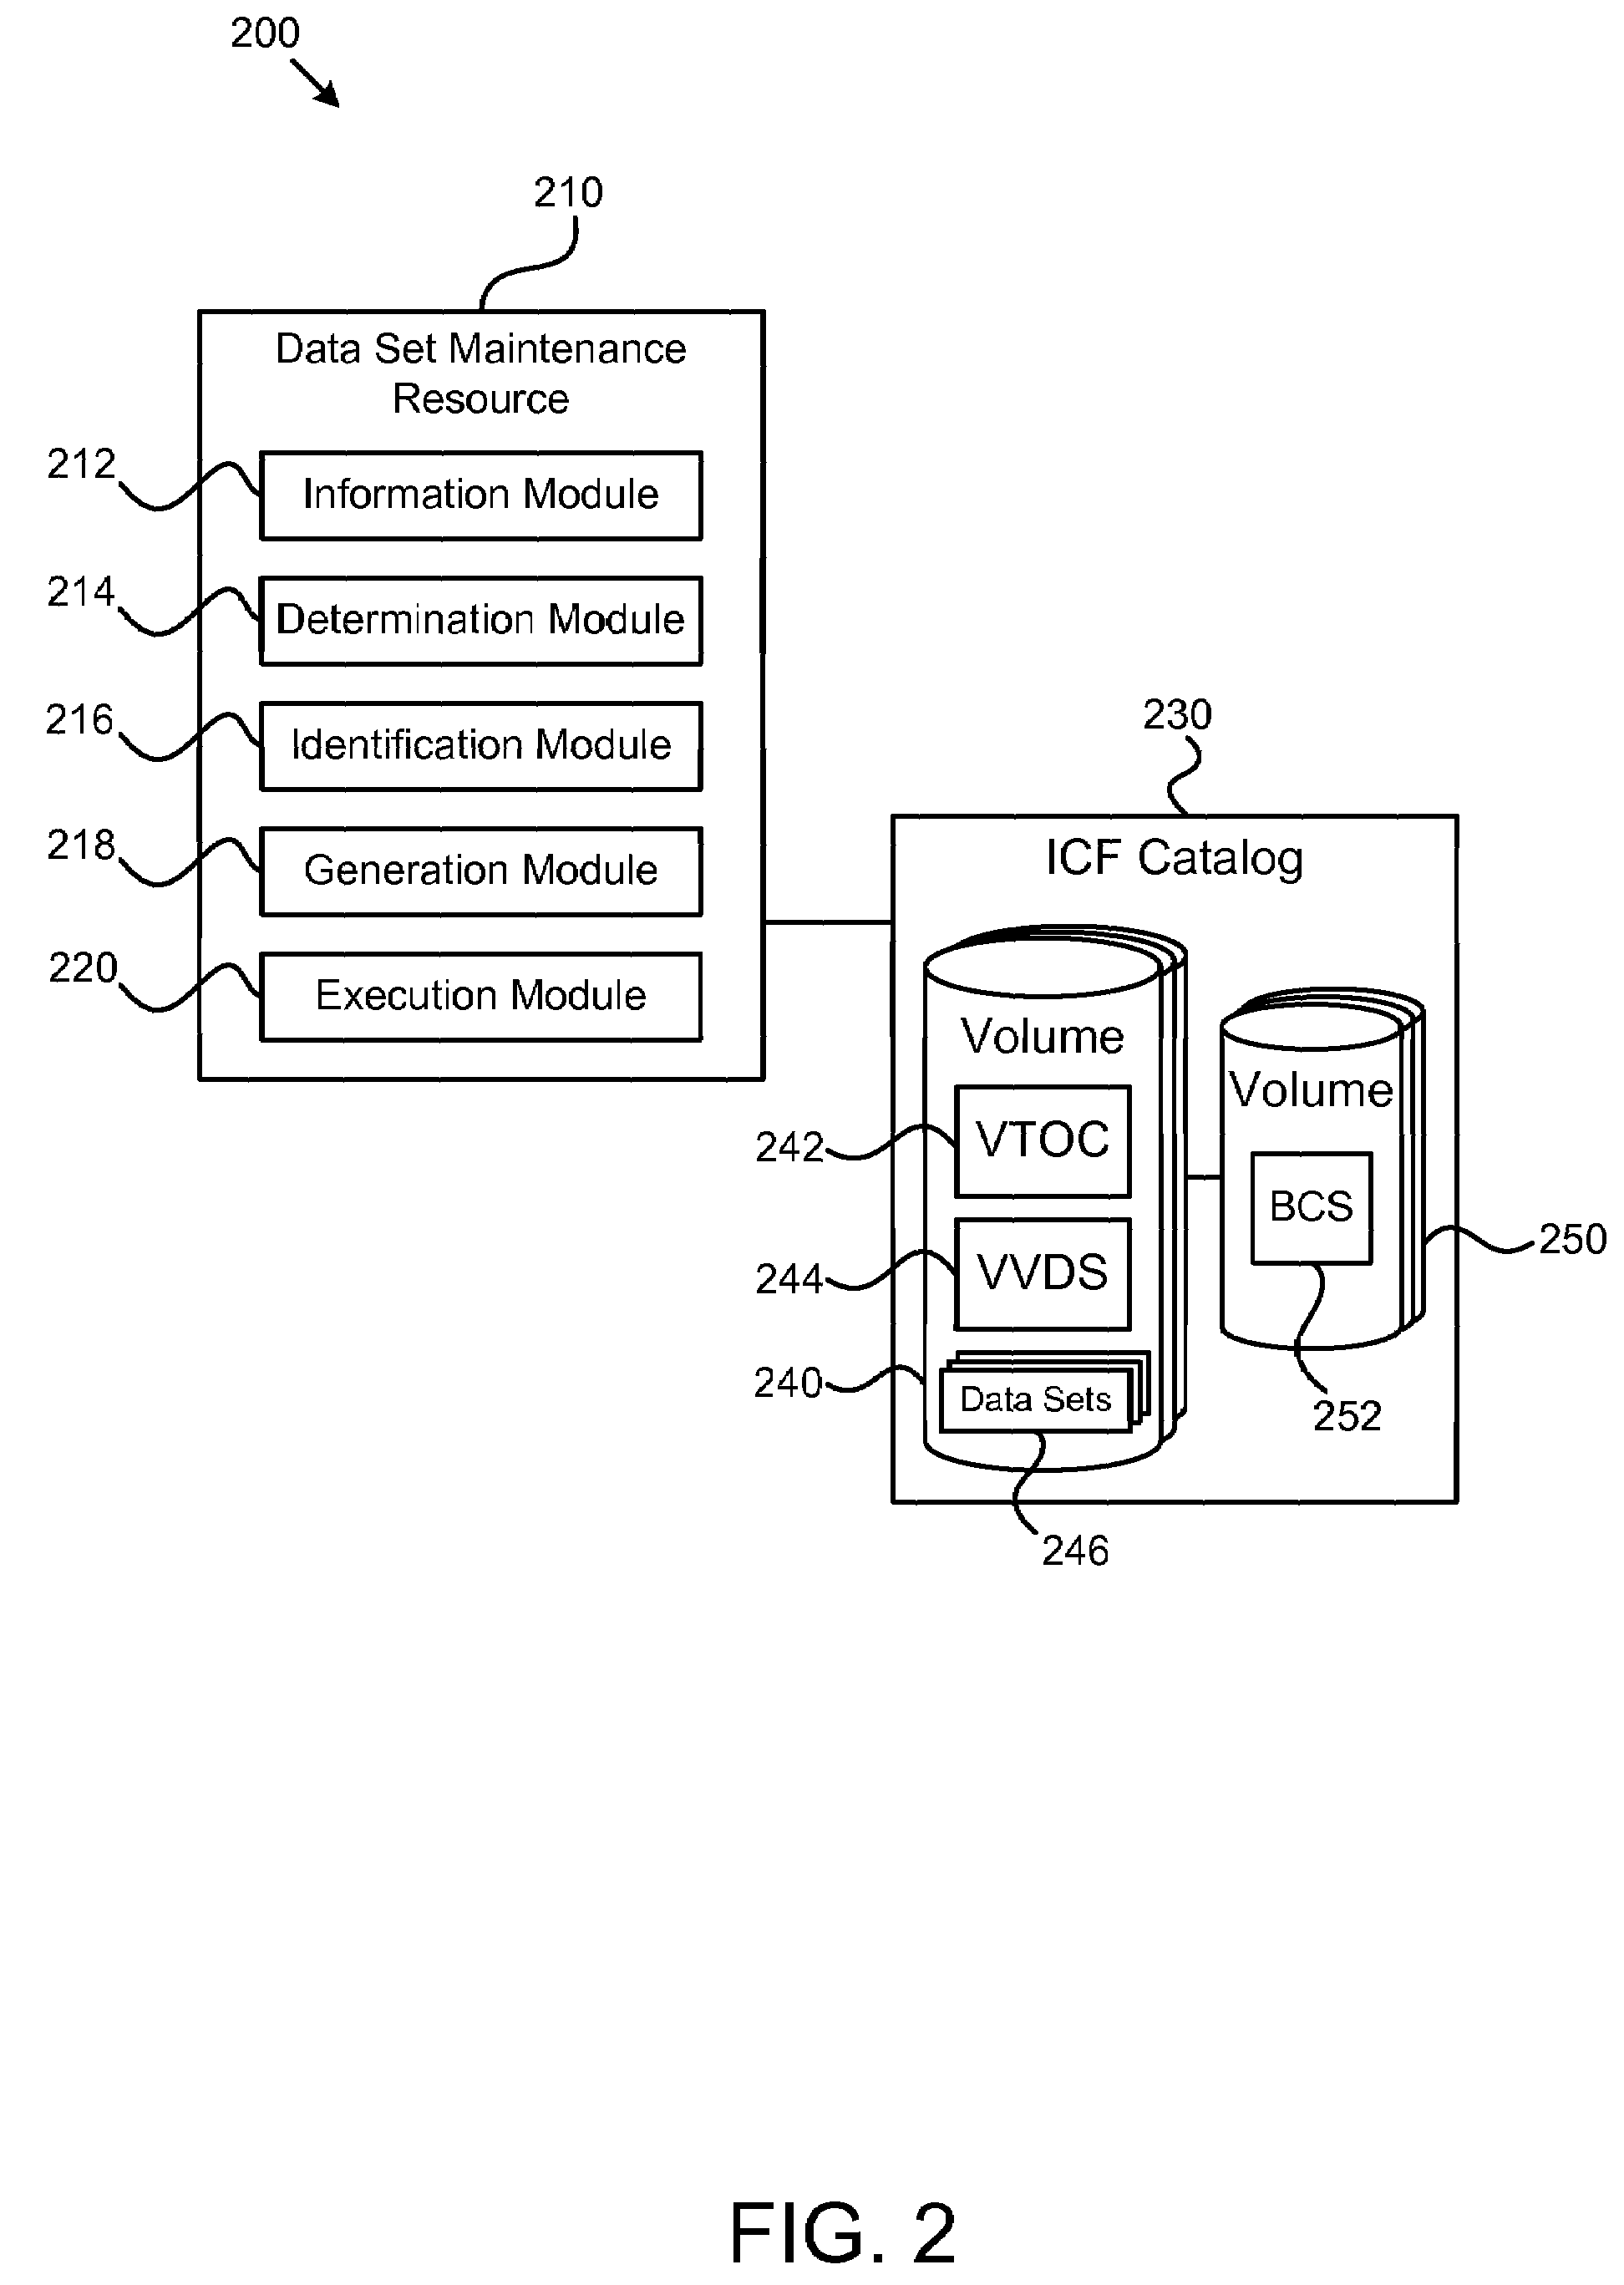 Apparatus, system, and method for automating vtoc driven data set maintenance